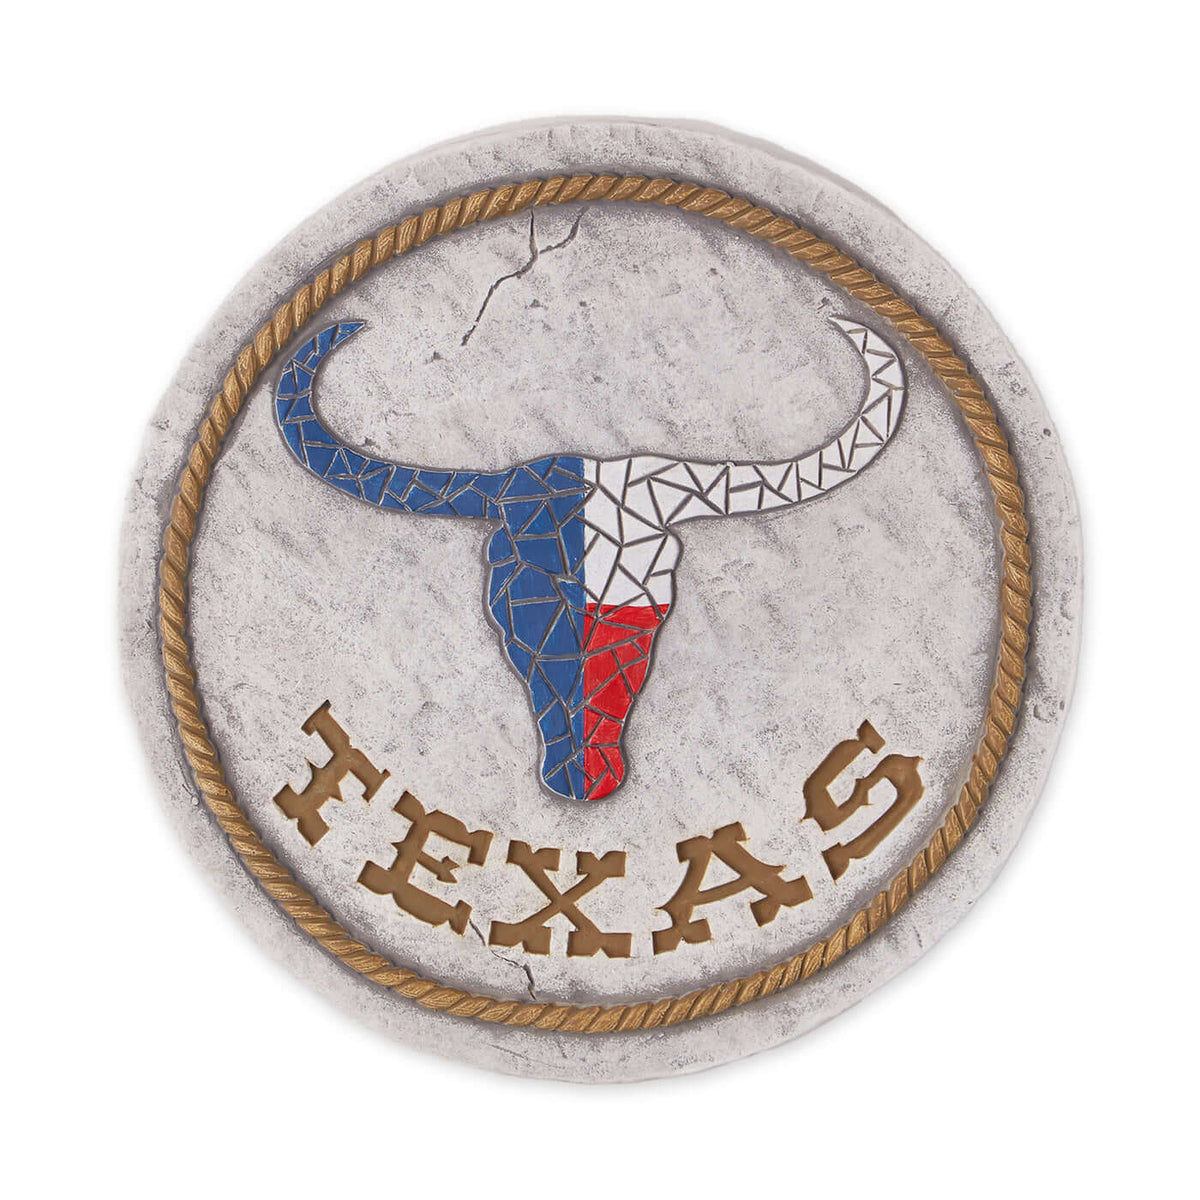 Don't Mess with Texas Heart and Texas Longhorn Flag Decorative Stone